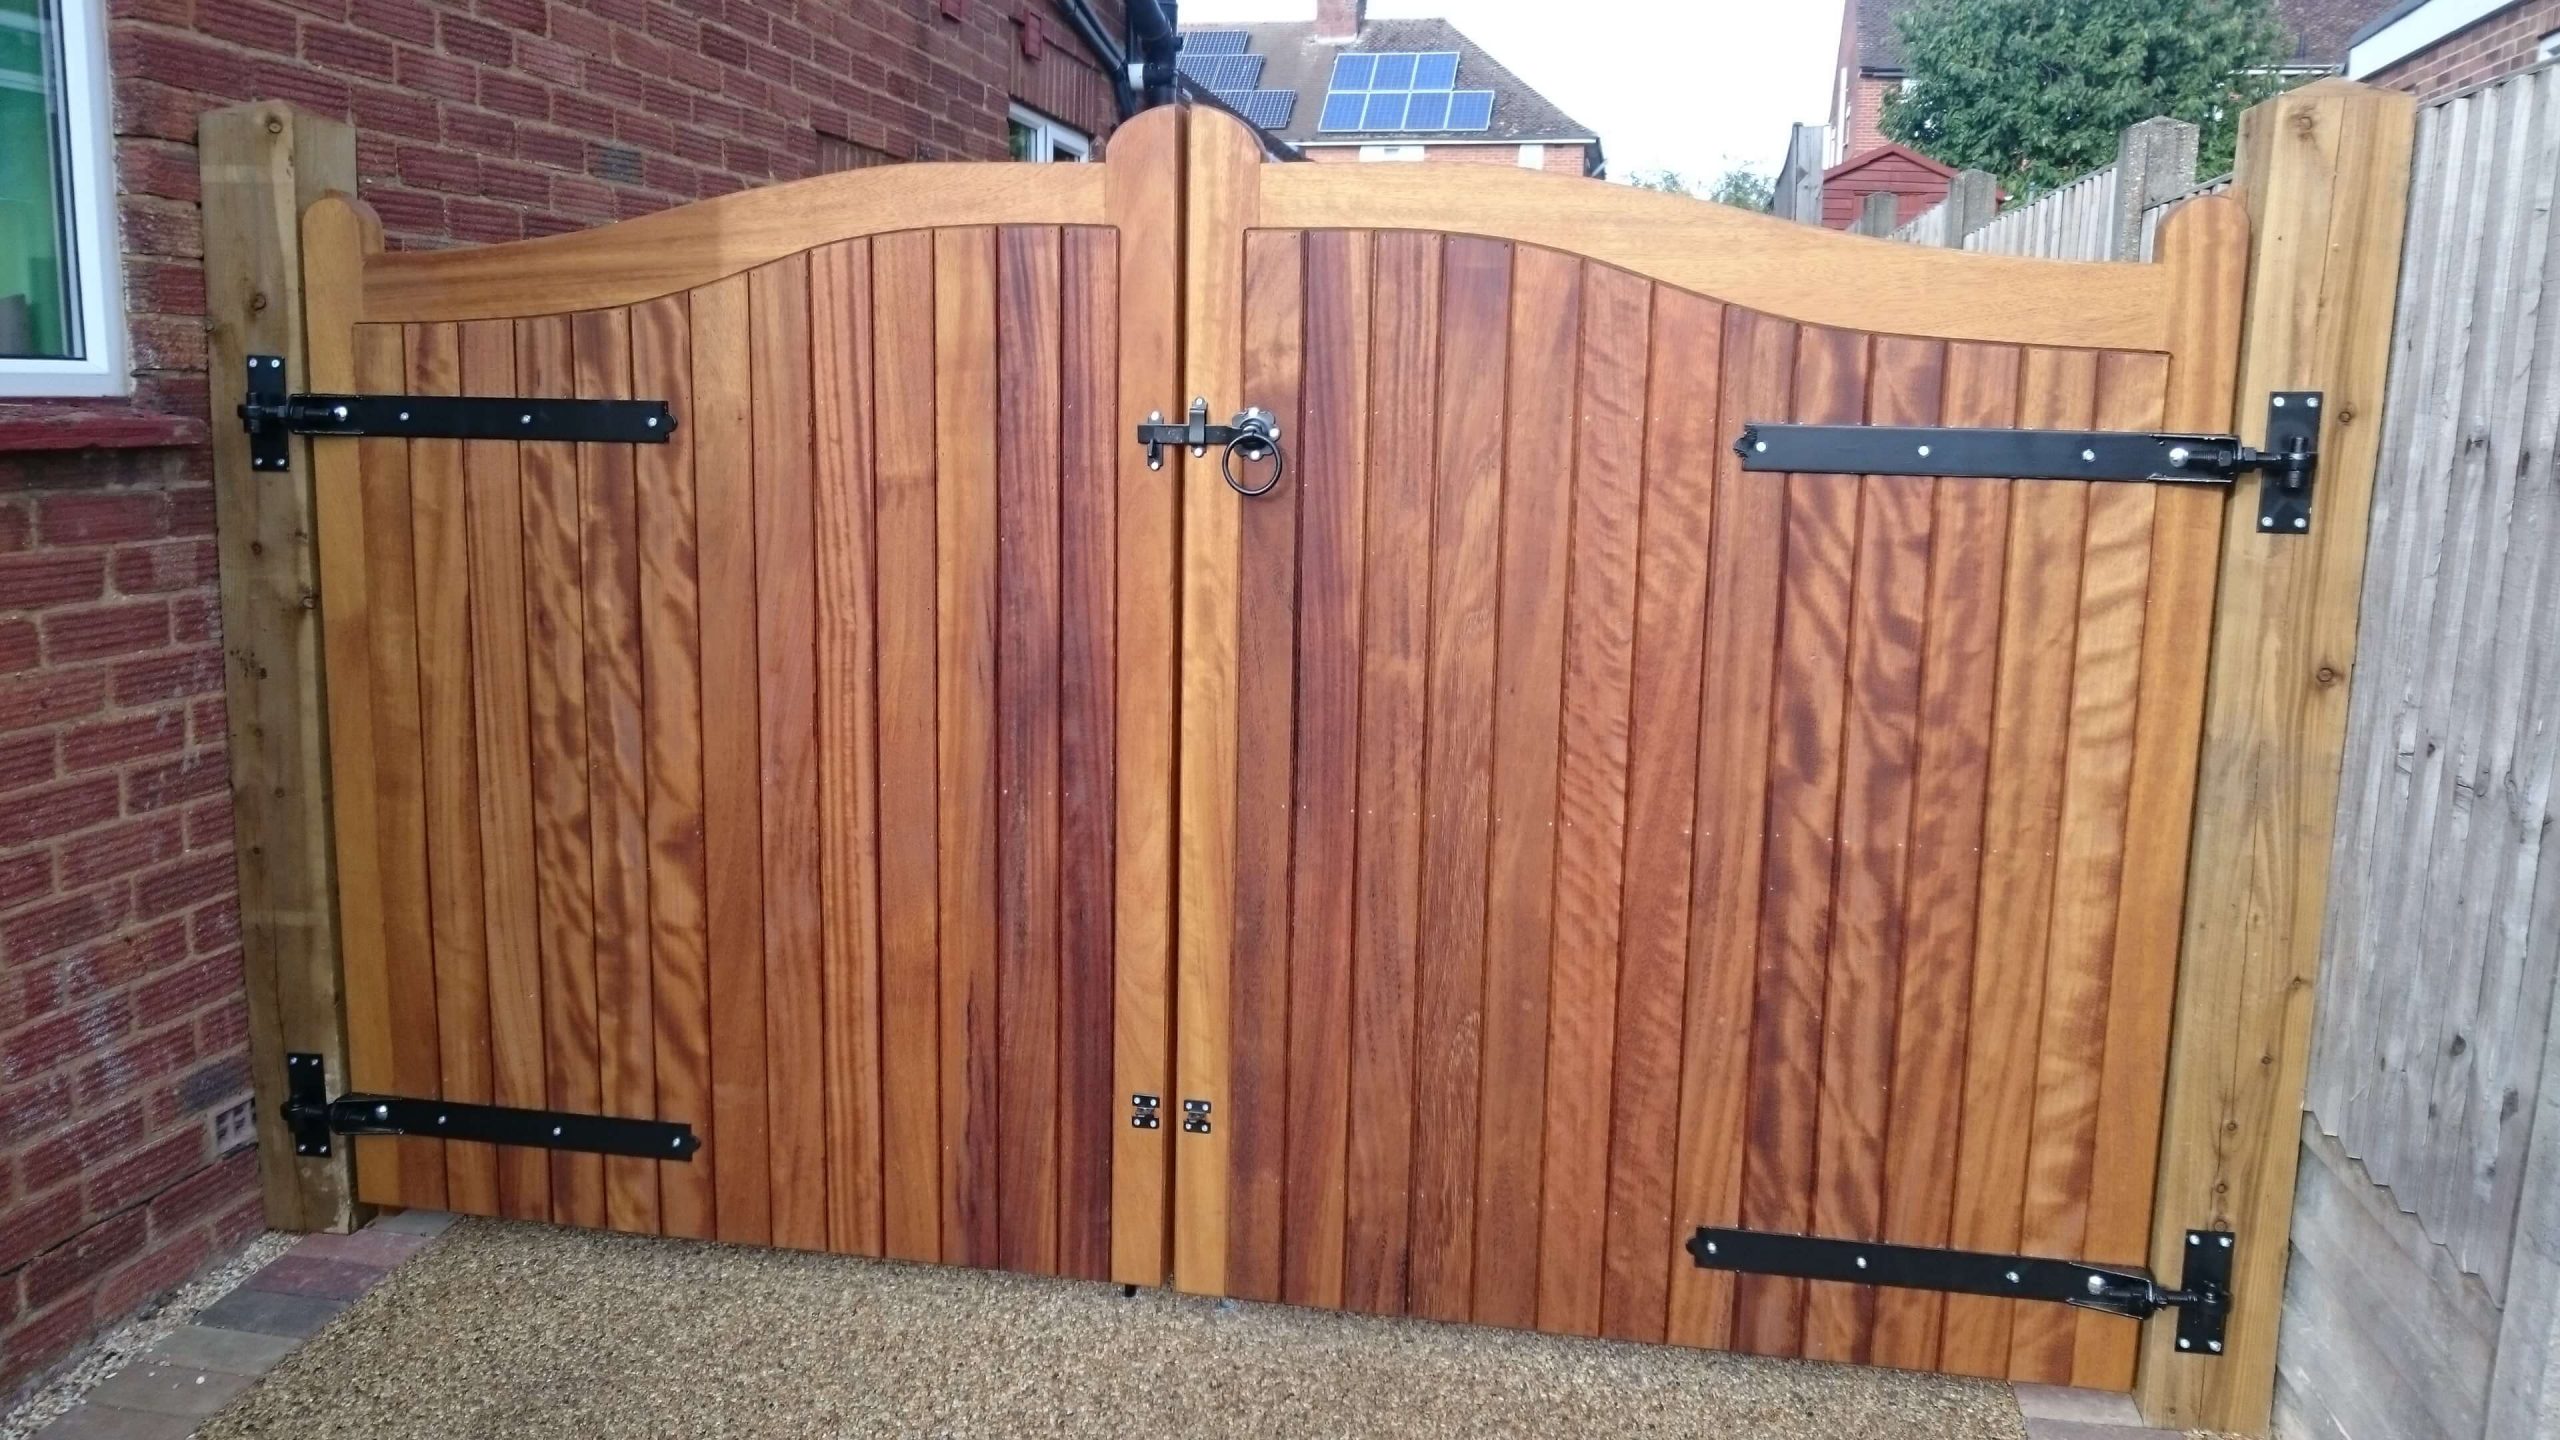 Wooden doors and latches